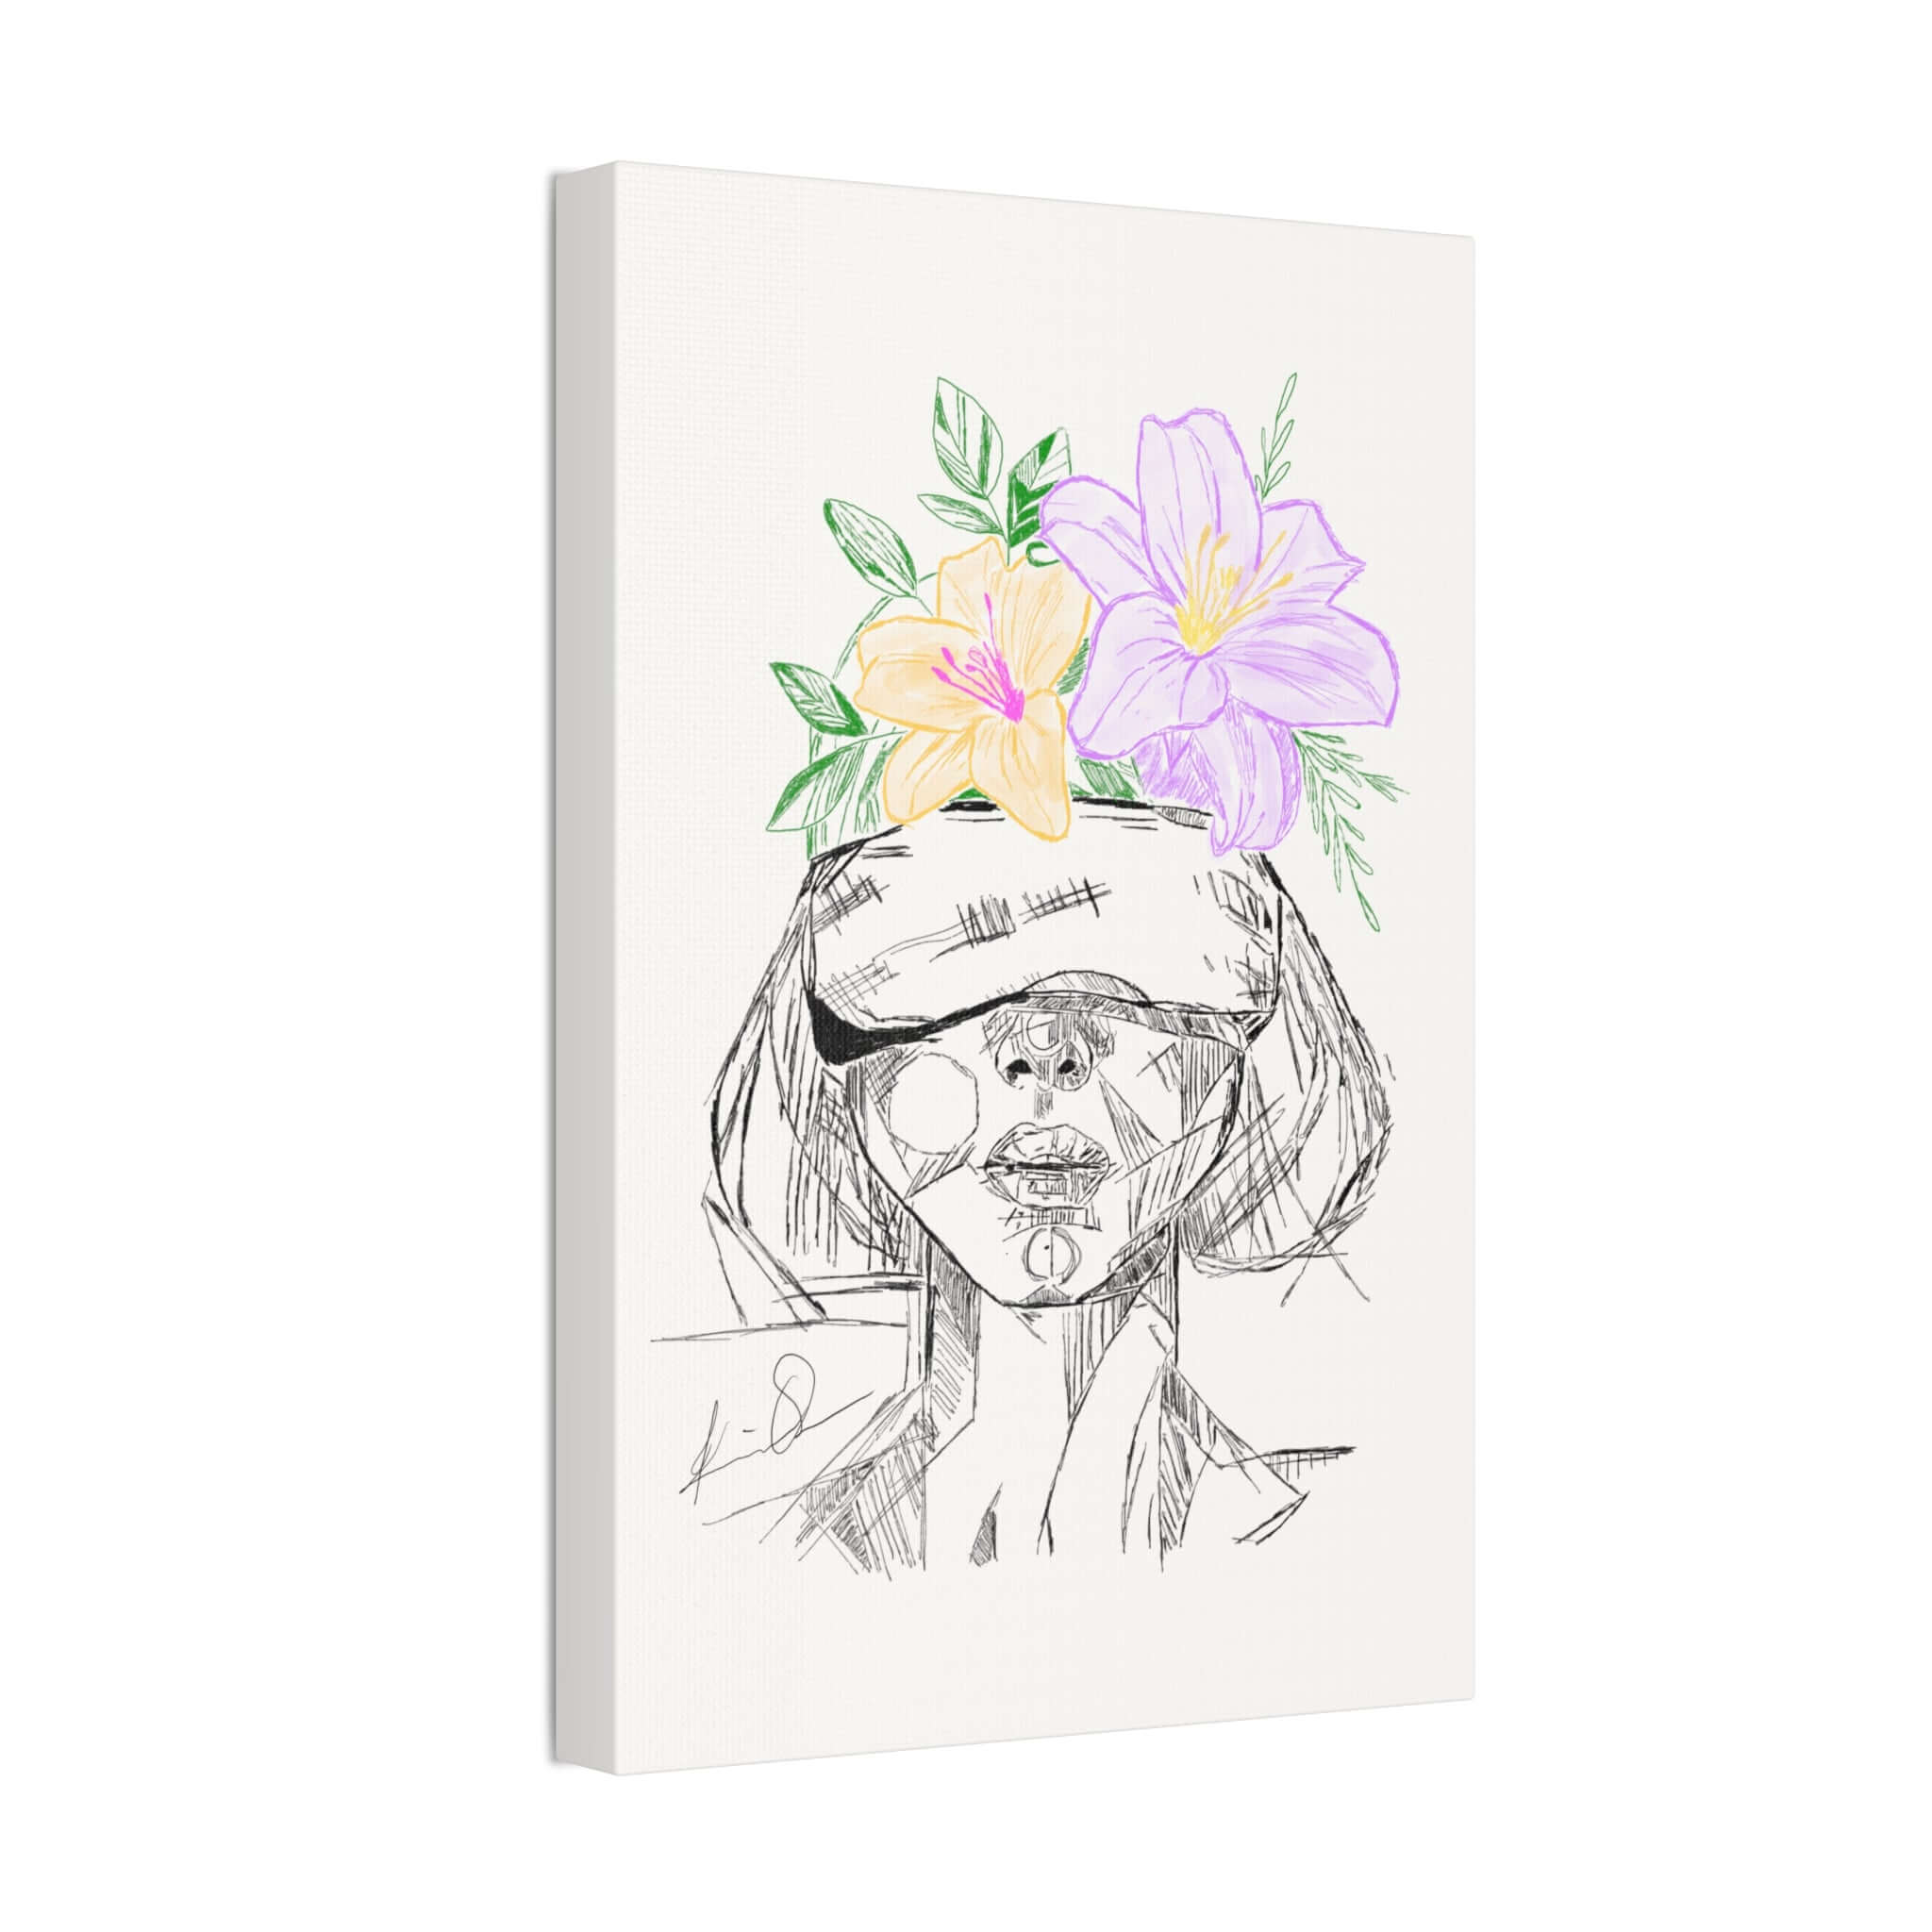 Blind Creativity canvas artwork featuring a sketched face with flowers blooming from the head, embodying shadows and sunshine.